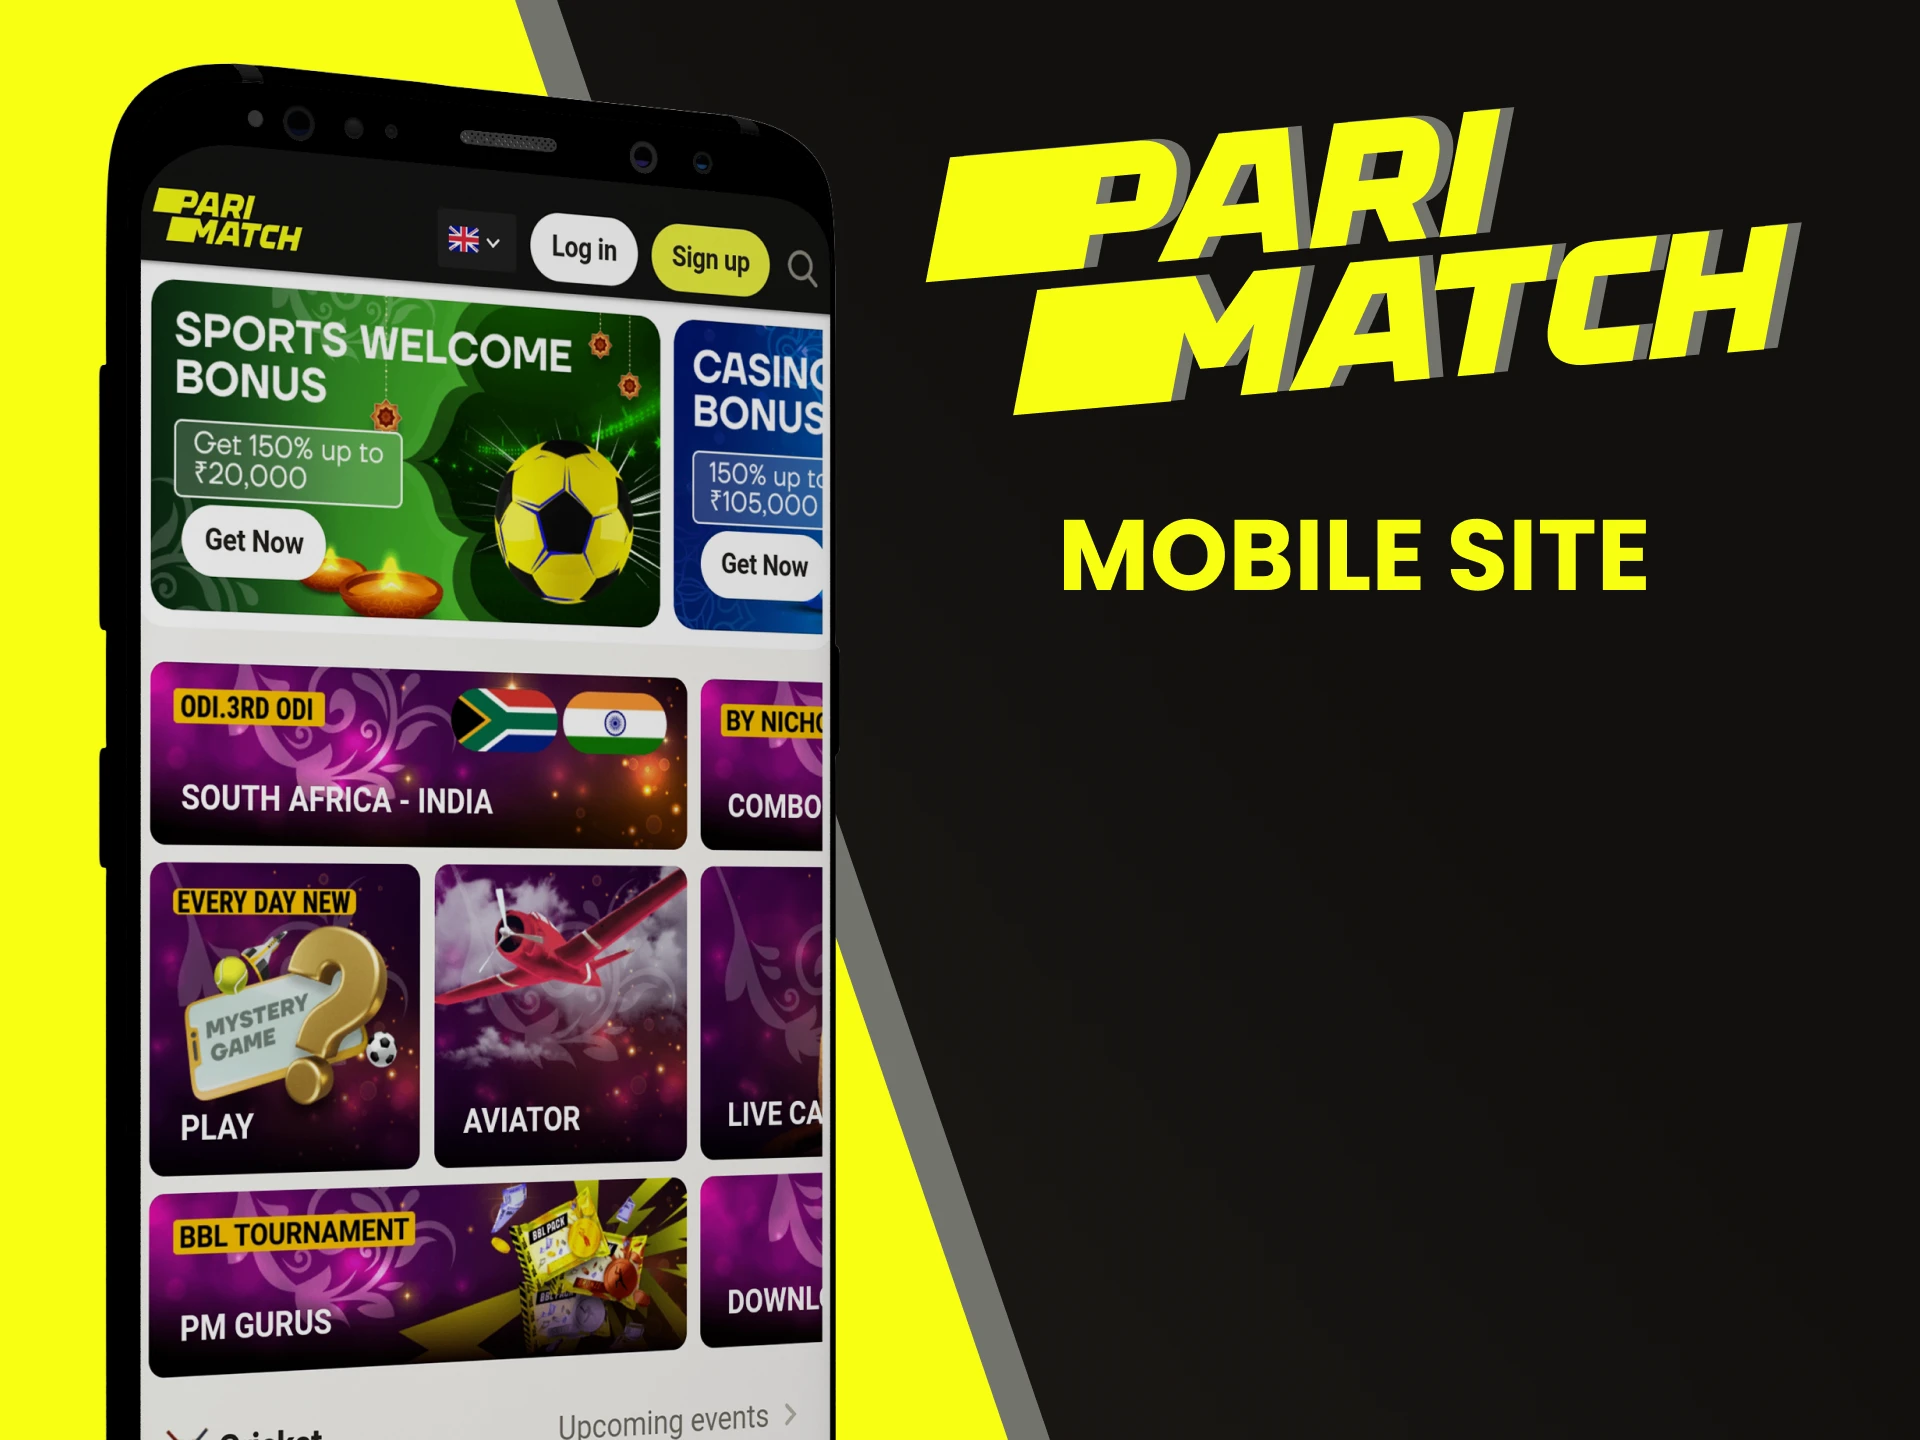 Visit the mobile version of the Parimatch website.